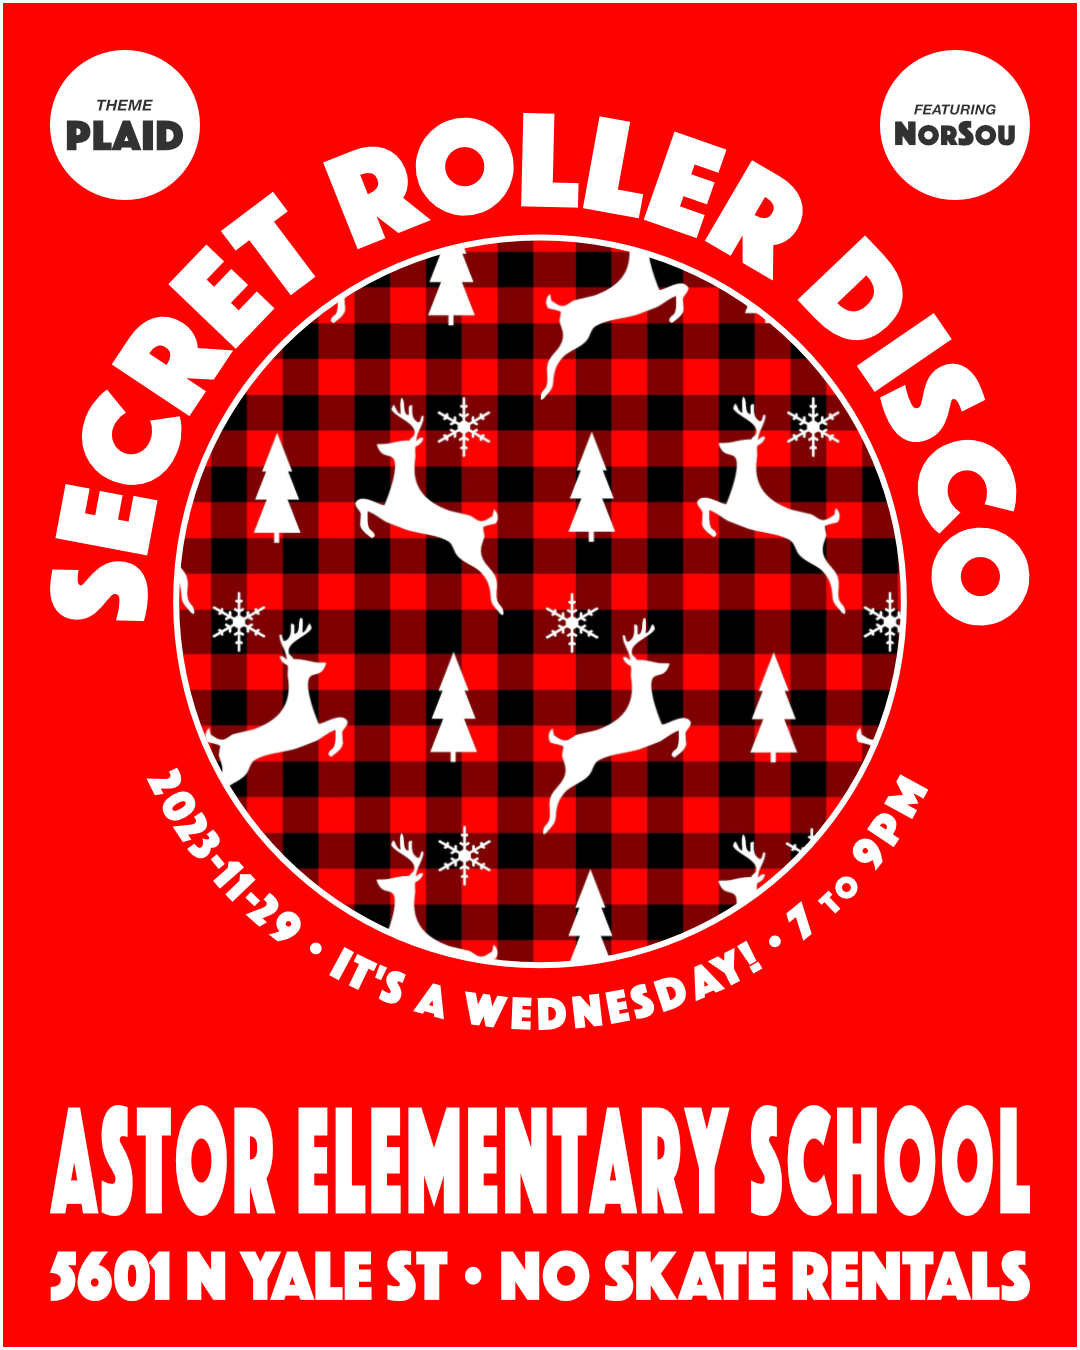 
        Flyer for Secret Roller Disco:
        Wednesday, November 29, 2023, 7 to 9pm.
        Astor Elementary School.  5601 N Yale St. All wheels welcome.
        No Skate Rentals.
      